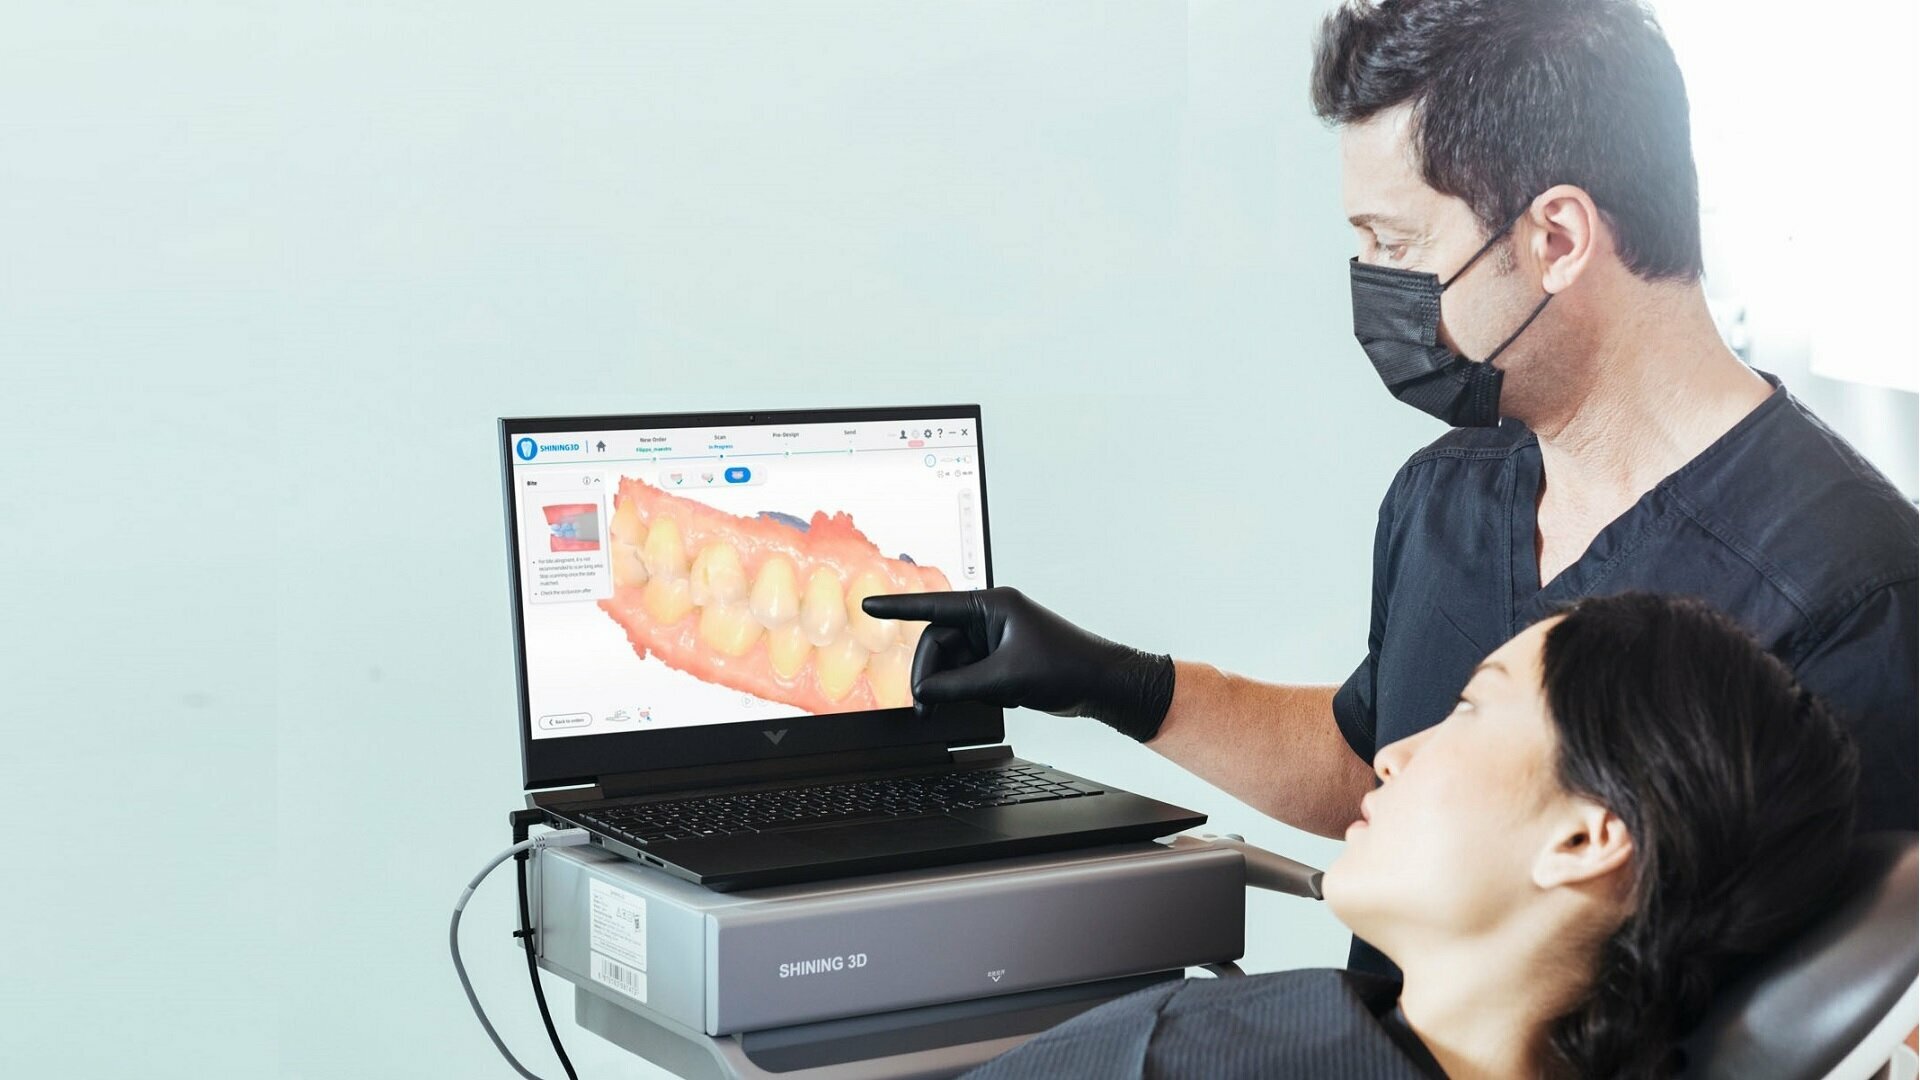 Review of Aoralscan 3: The latest intra-oral scanner by SHINING 3D—the best low-cost intra-oral scanner?